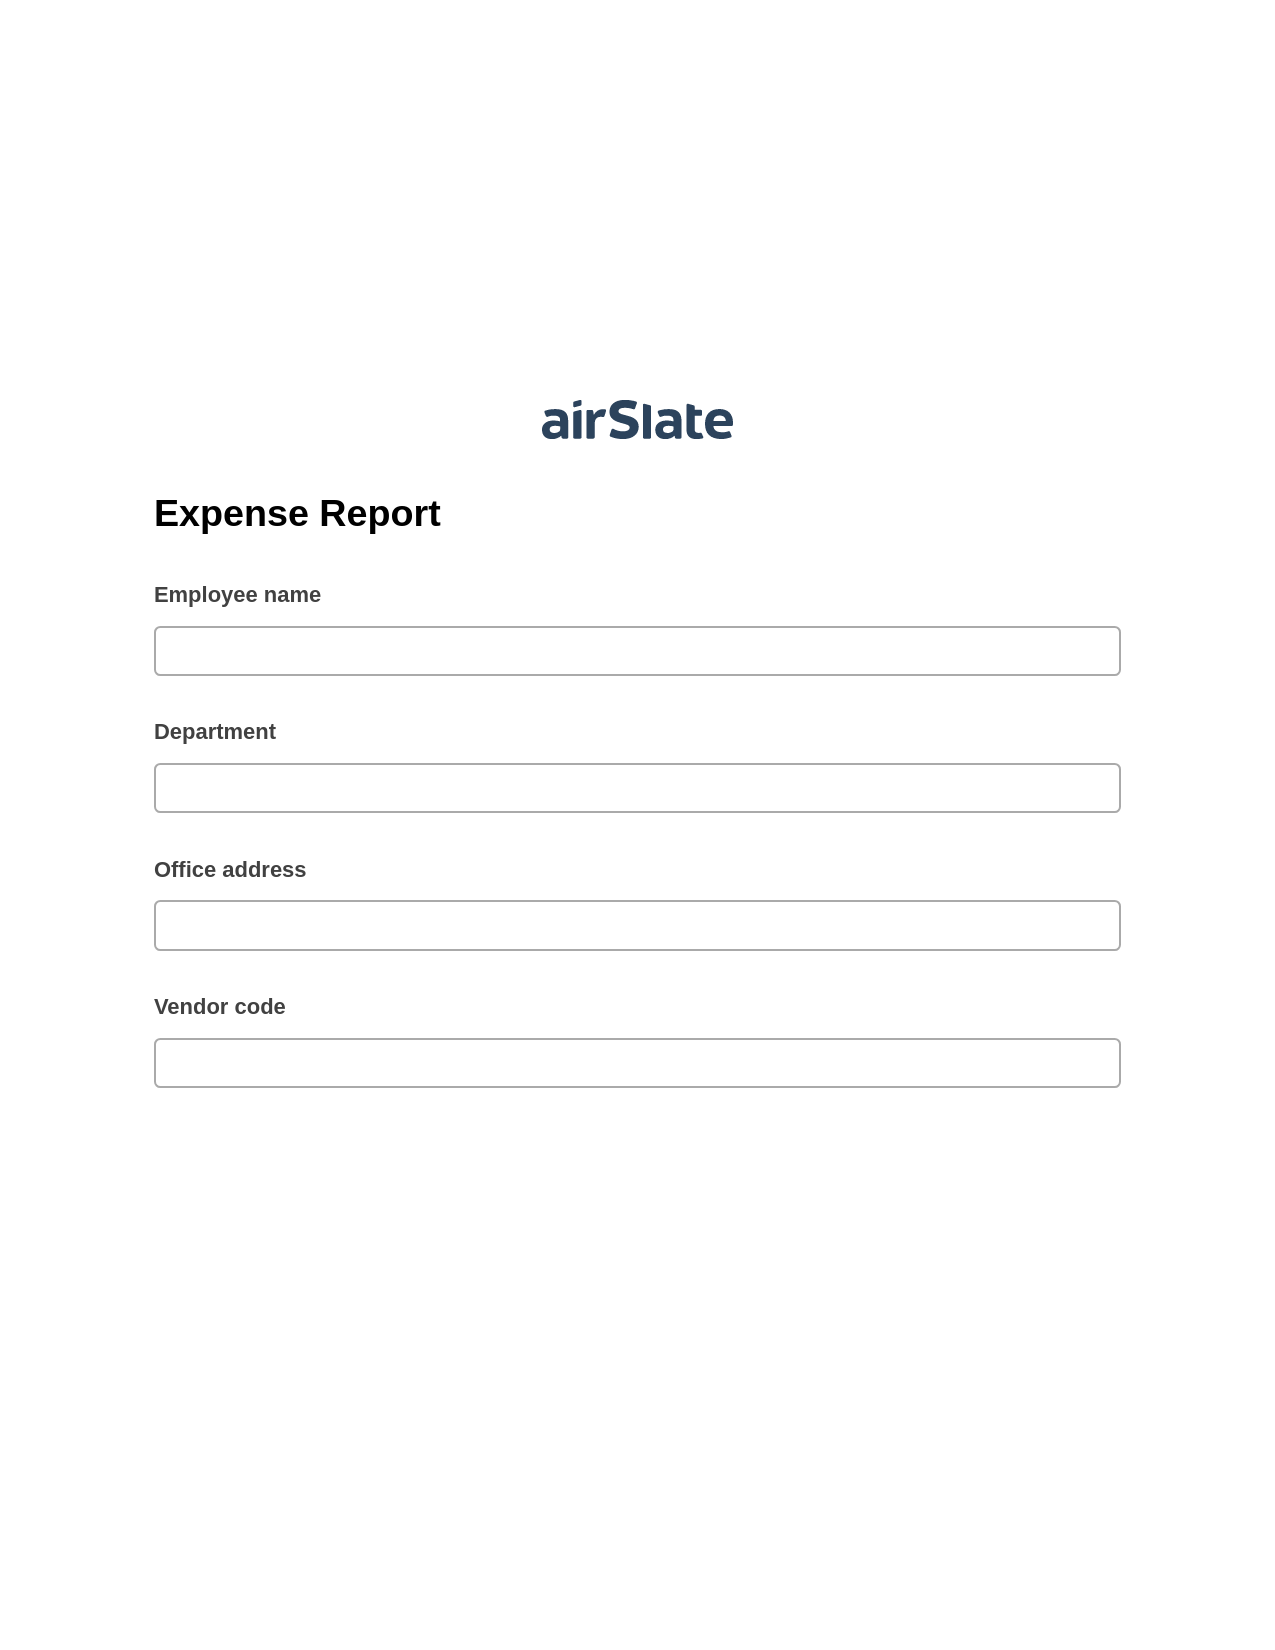 Expense Report Pre-fill from CSV File Bot, Reminder Bot, Archive to SharePoint Folder Bot